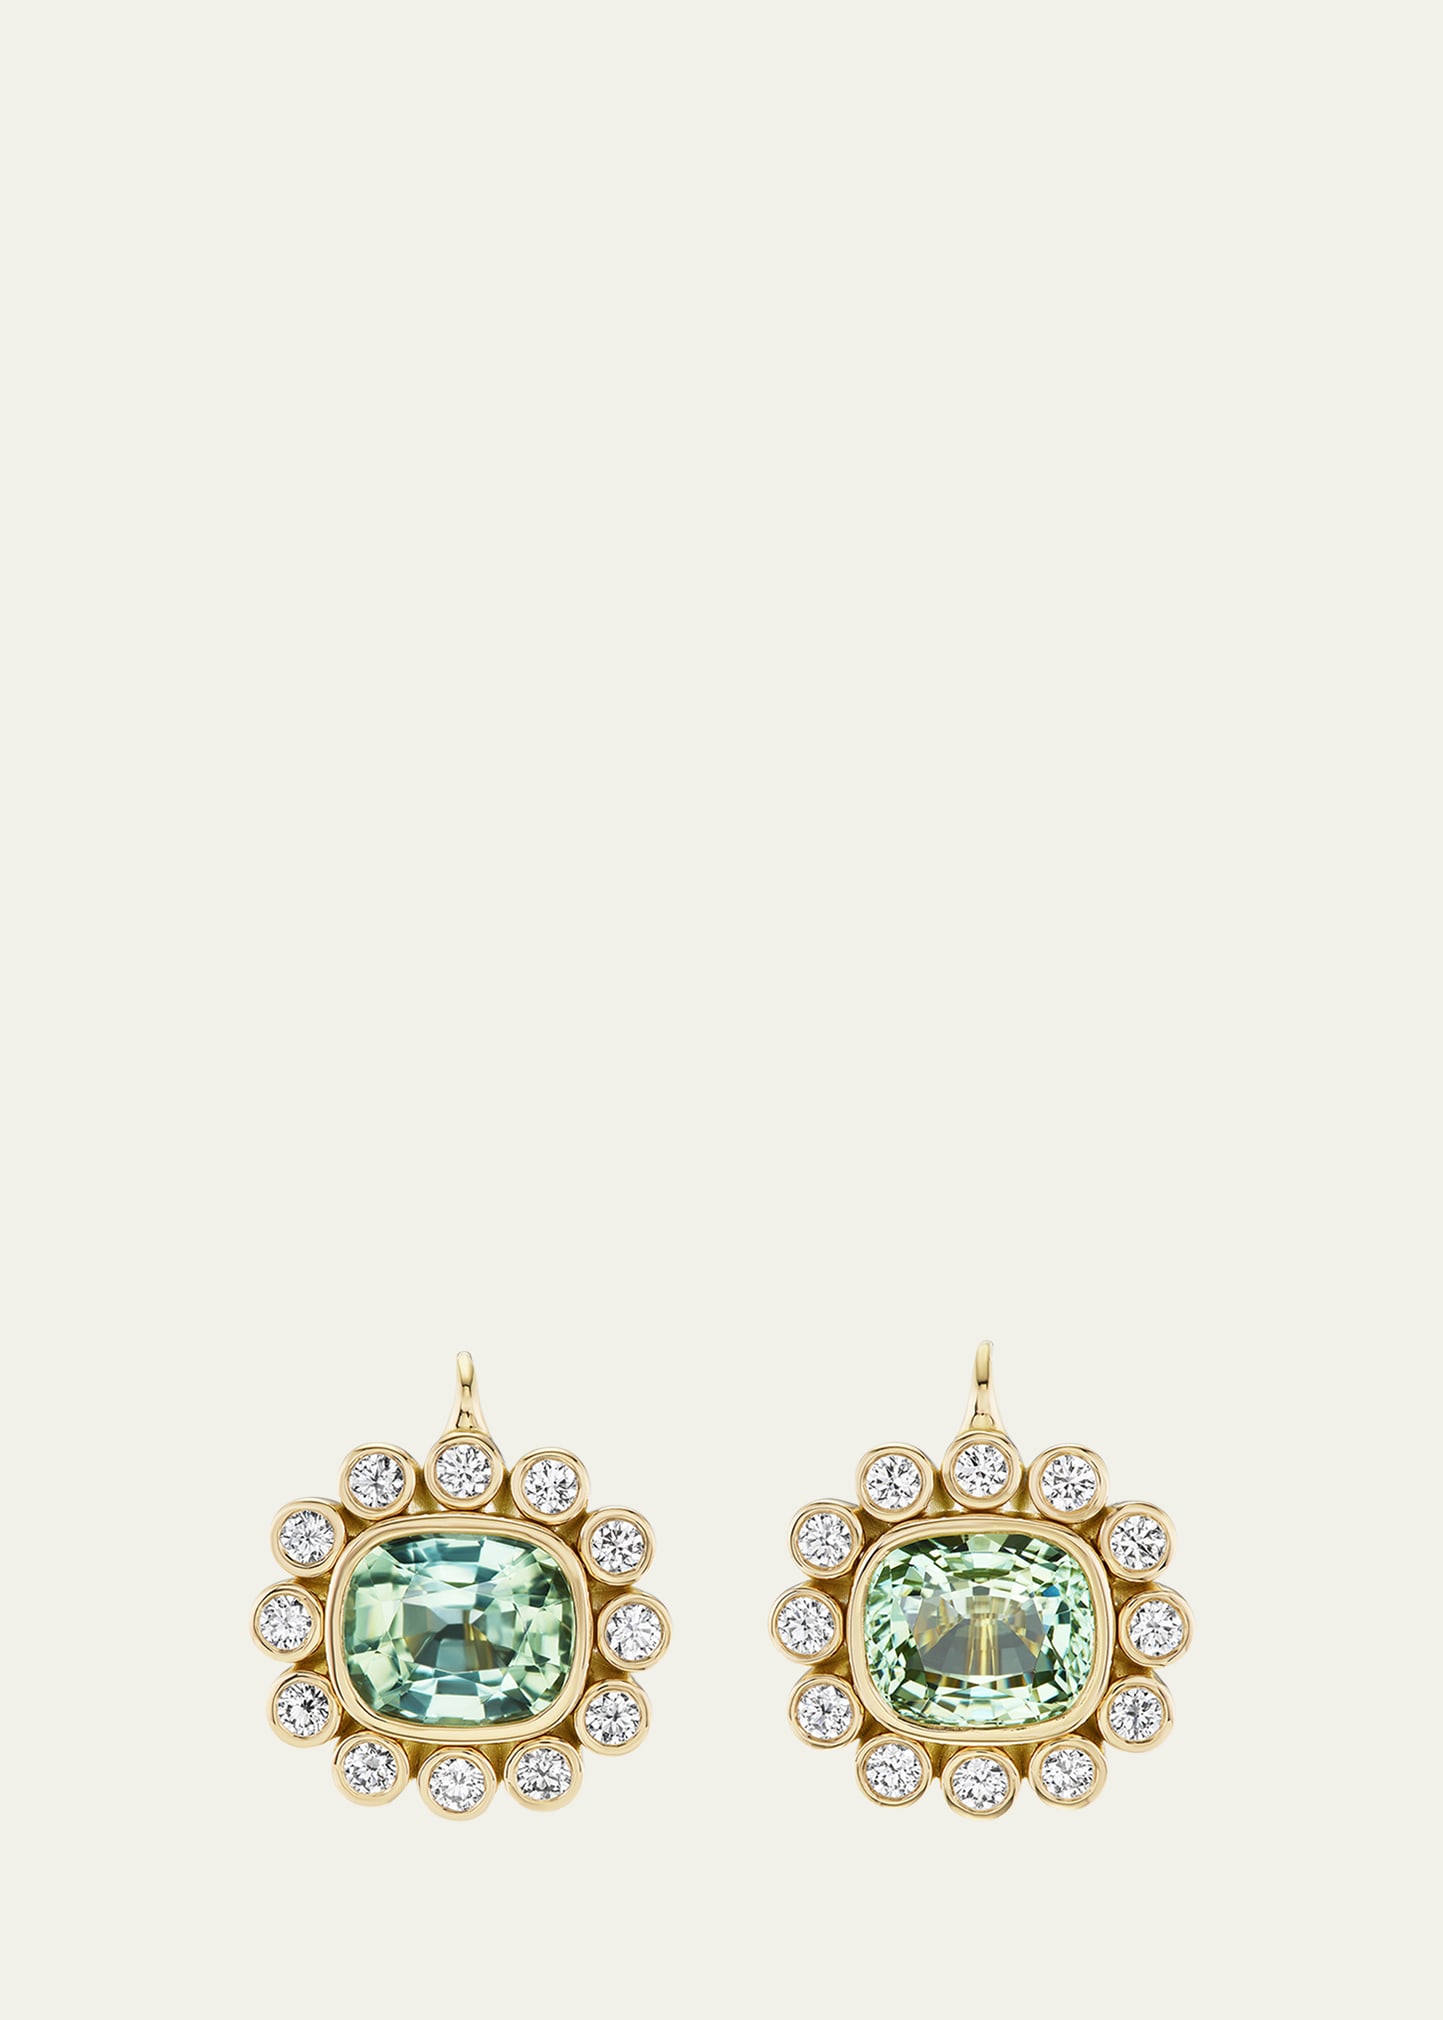 One-of-a-Kind Wildflower Drop Earrings with Mint Tourmaline